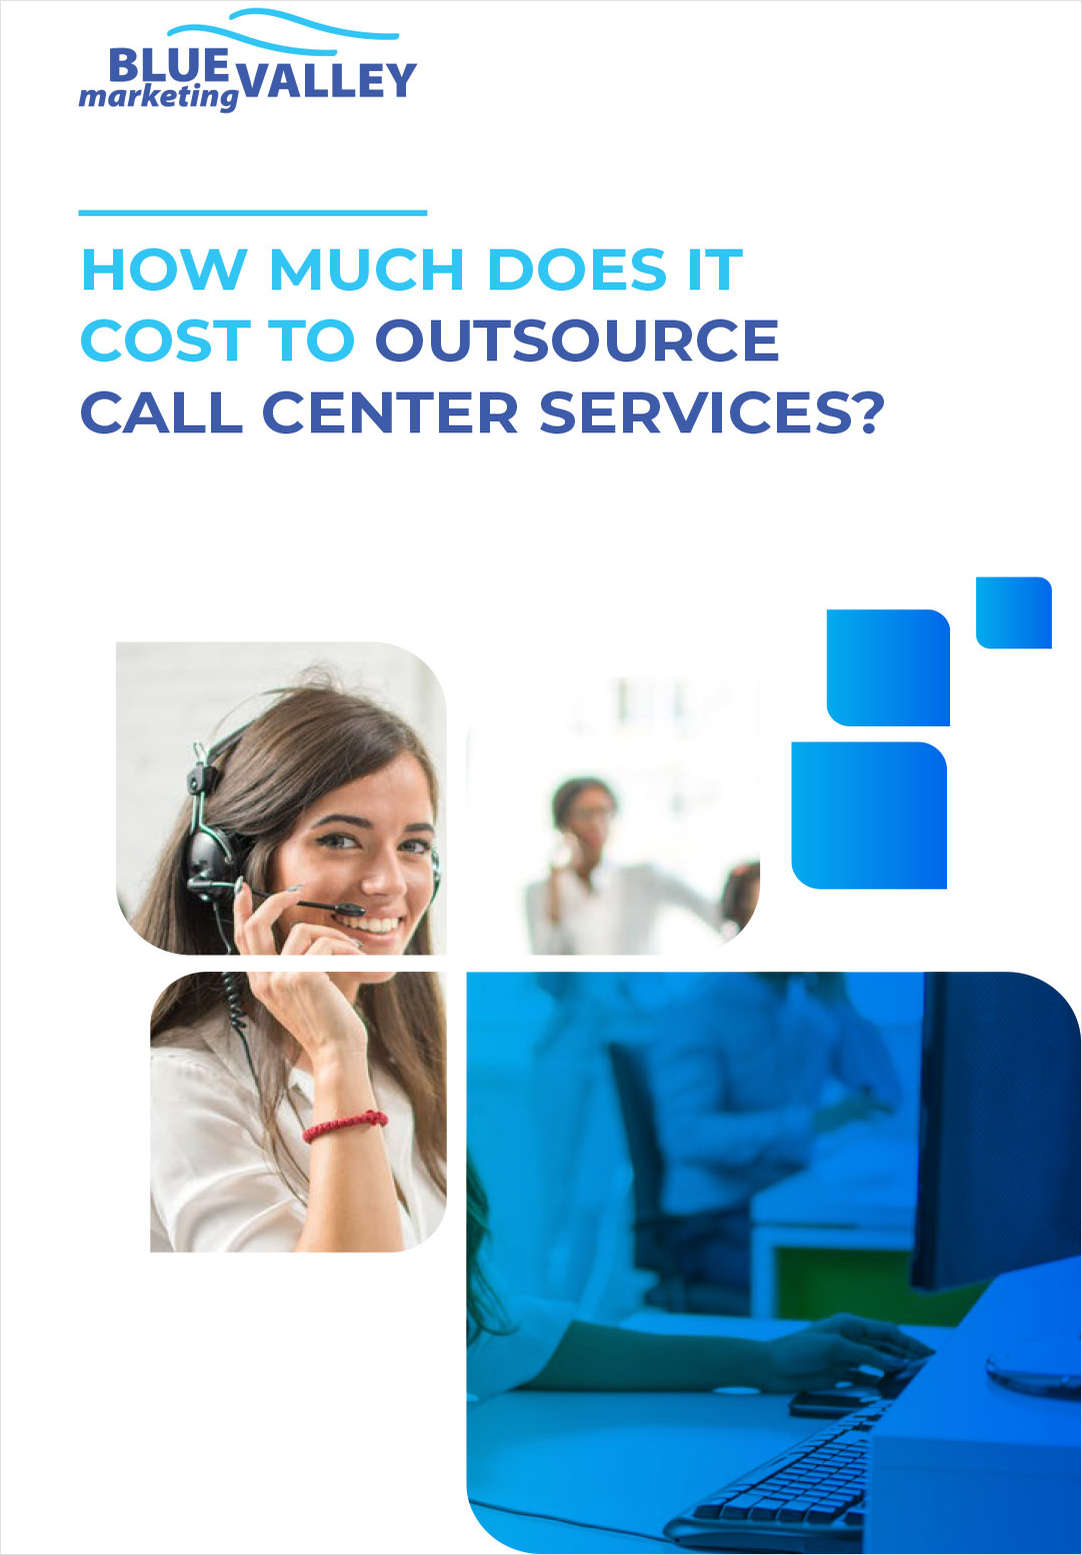 How Much Does It Cost to Outsource Call Center Services?